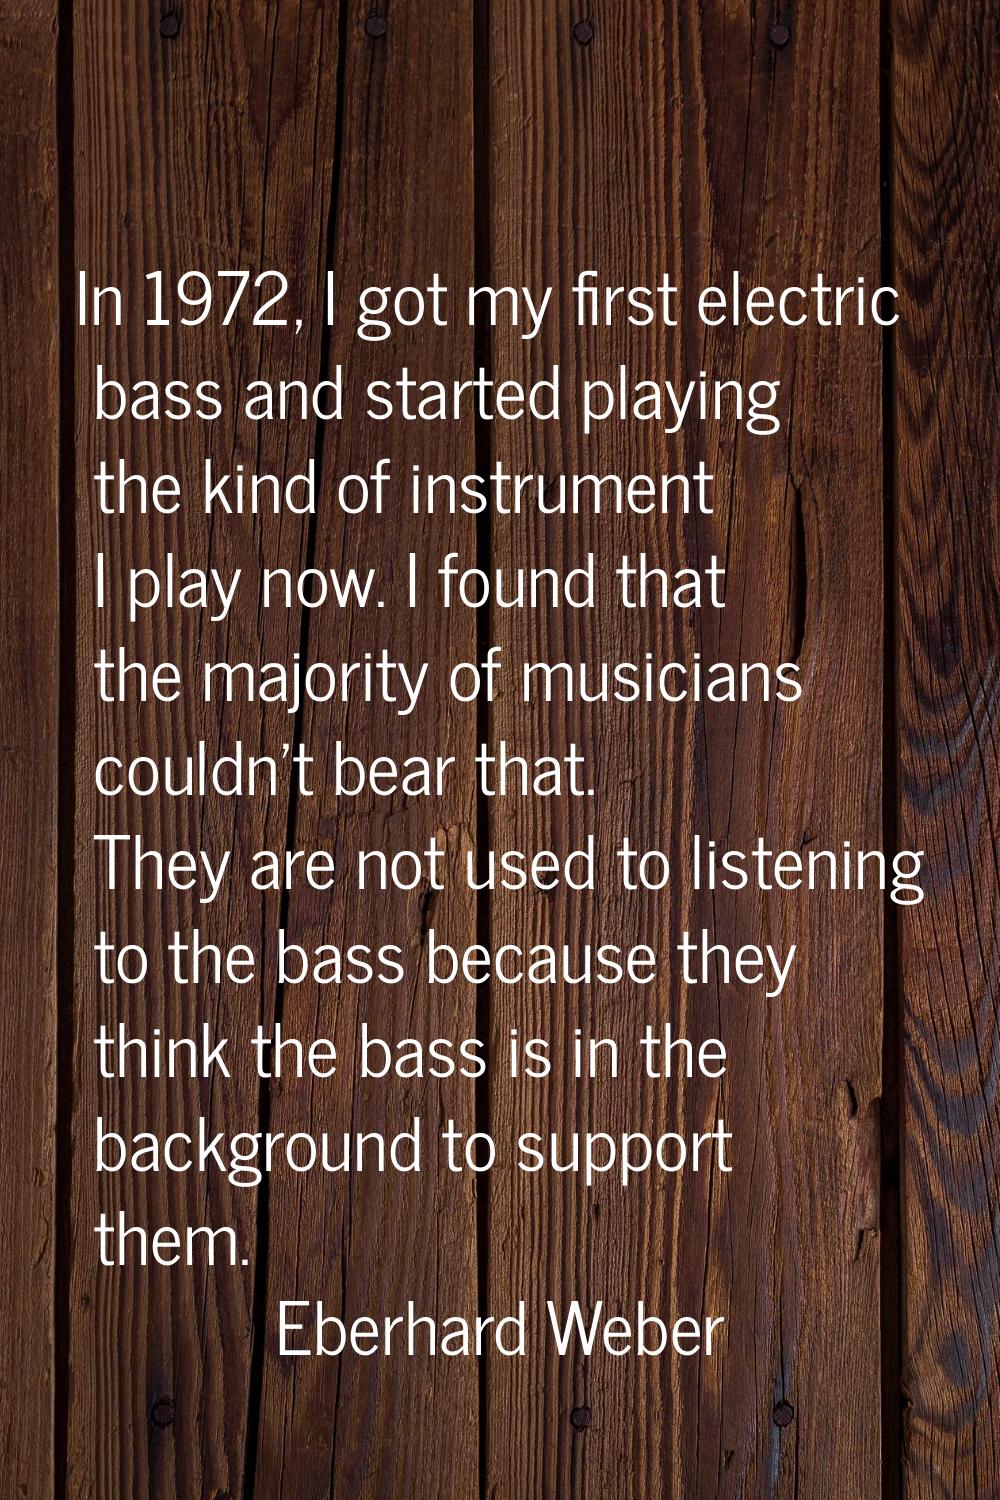 In 1972, I got my first electric bass and started playing the kind of instrument I play now. I foun